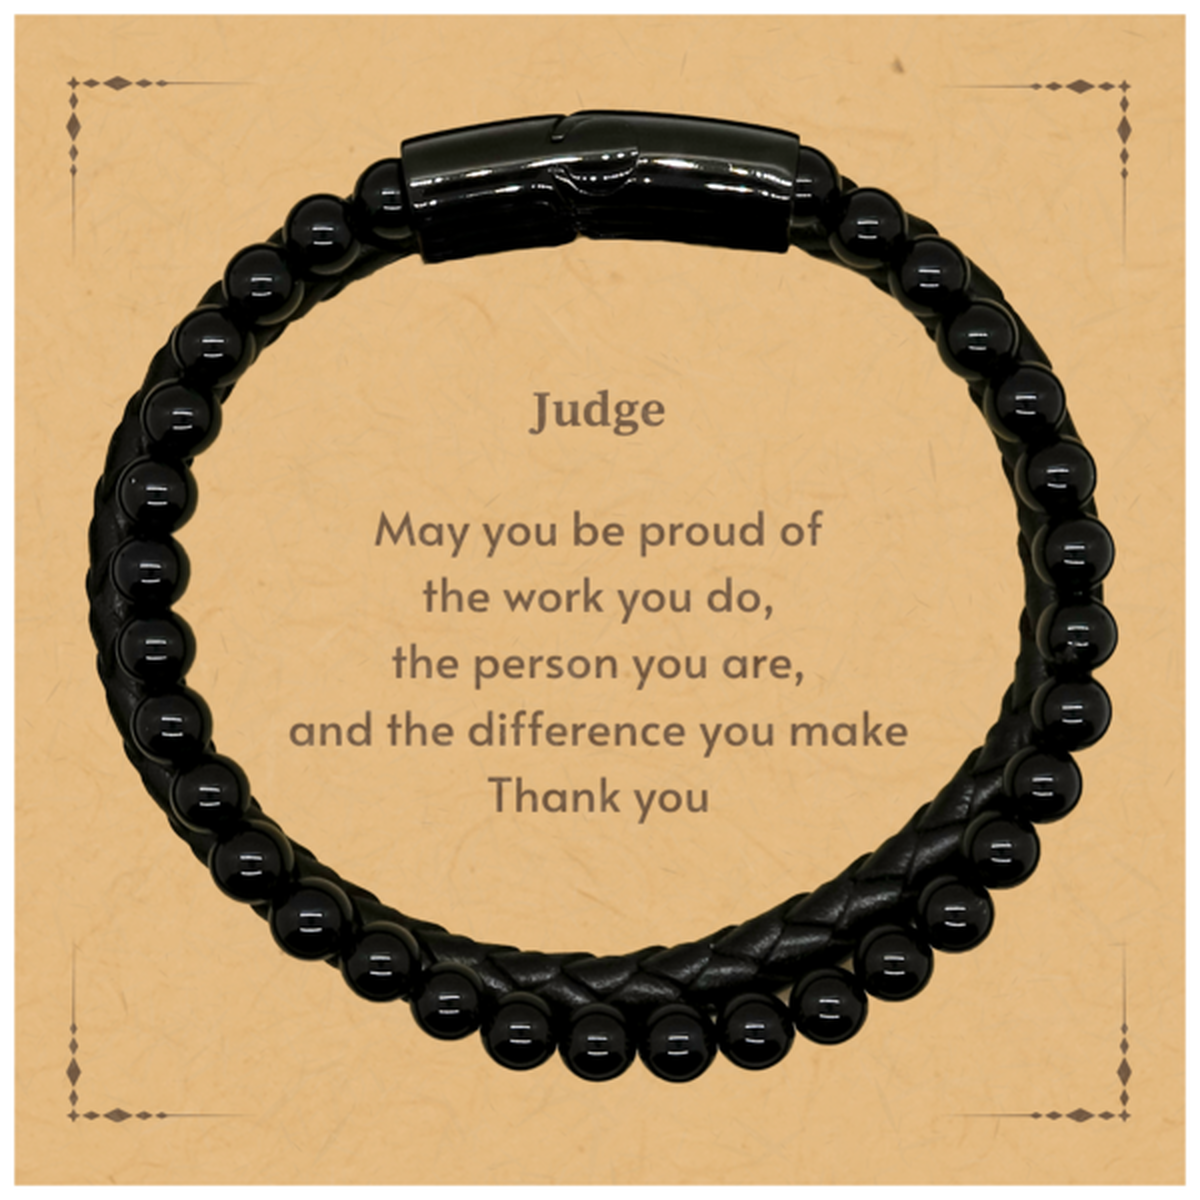 Heartwarming Stone Leather Bracelets Retirement Coworkers Gifts for Judge, Judge May You be proud of the work you do, the person you are Gifts for Boss Men Women Friends